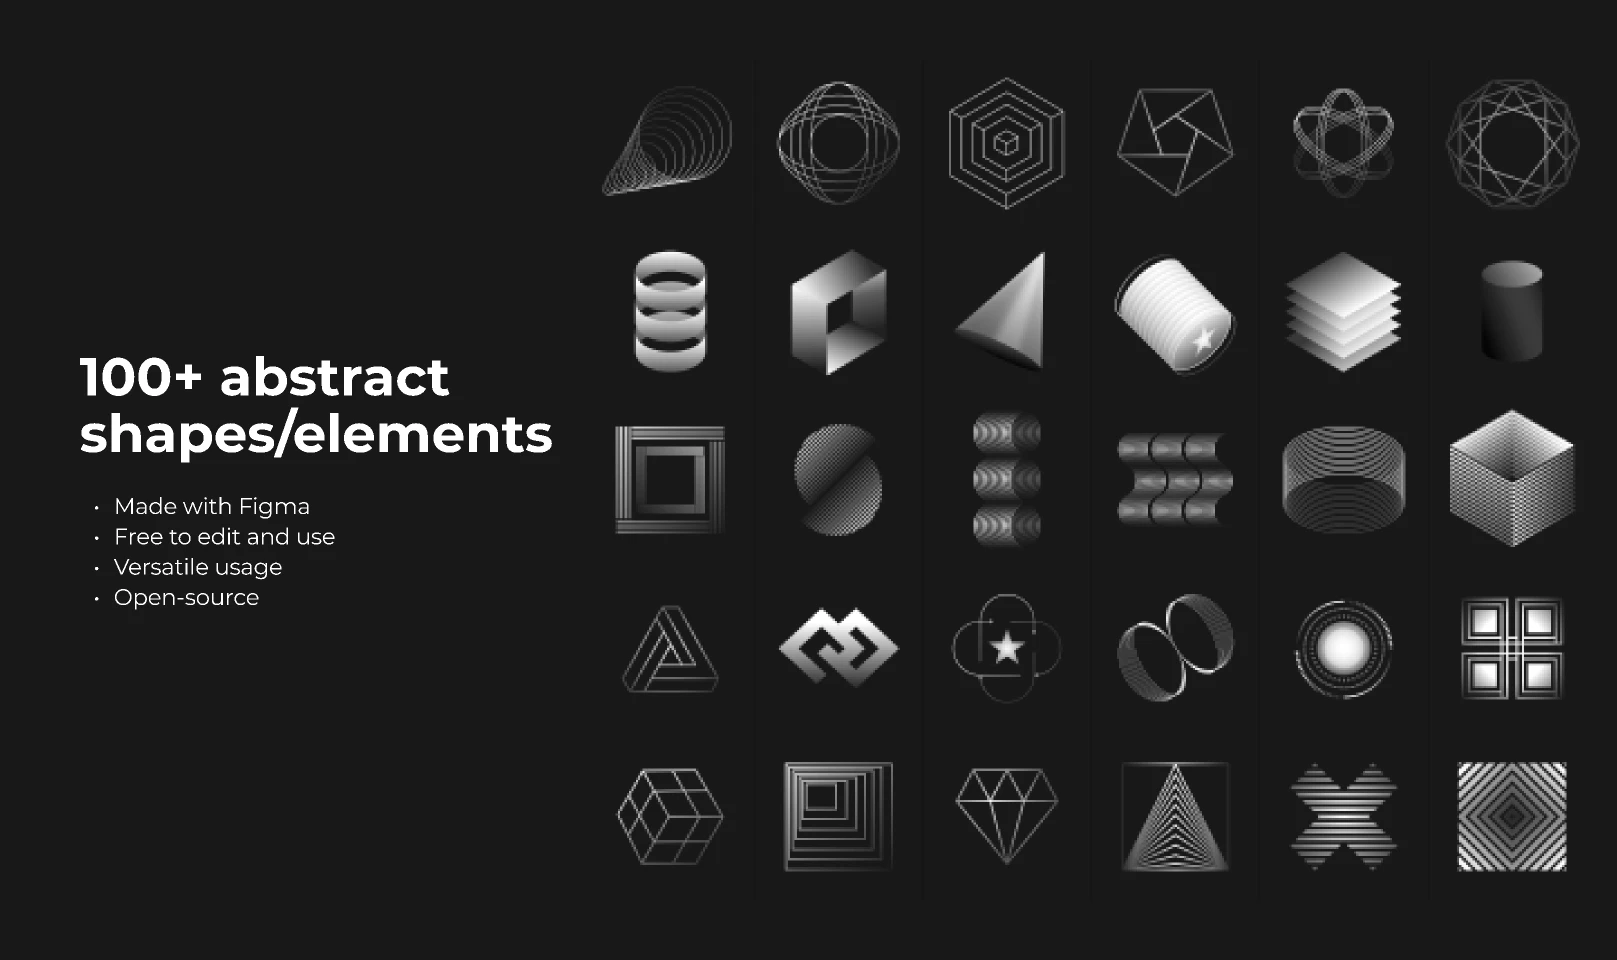 100+ abstract shapes/elements for Figma and Adobe XD